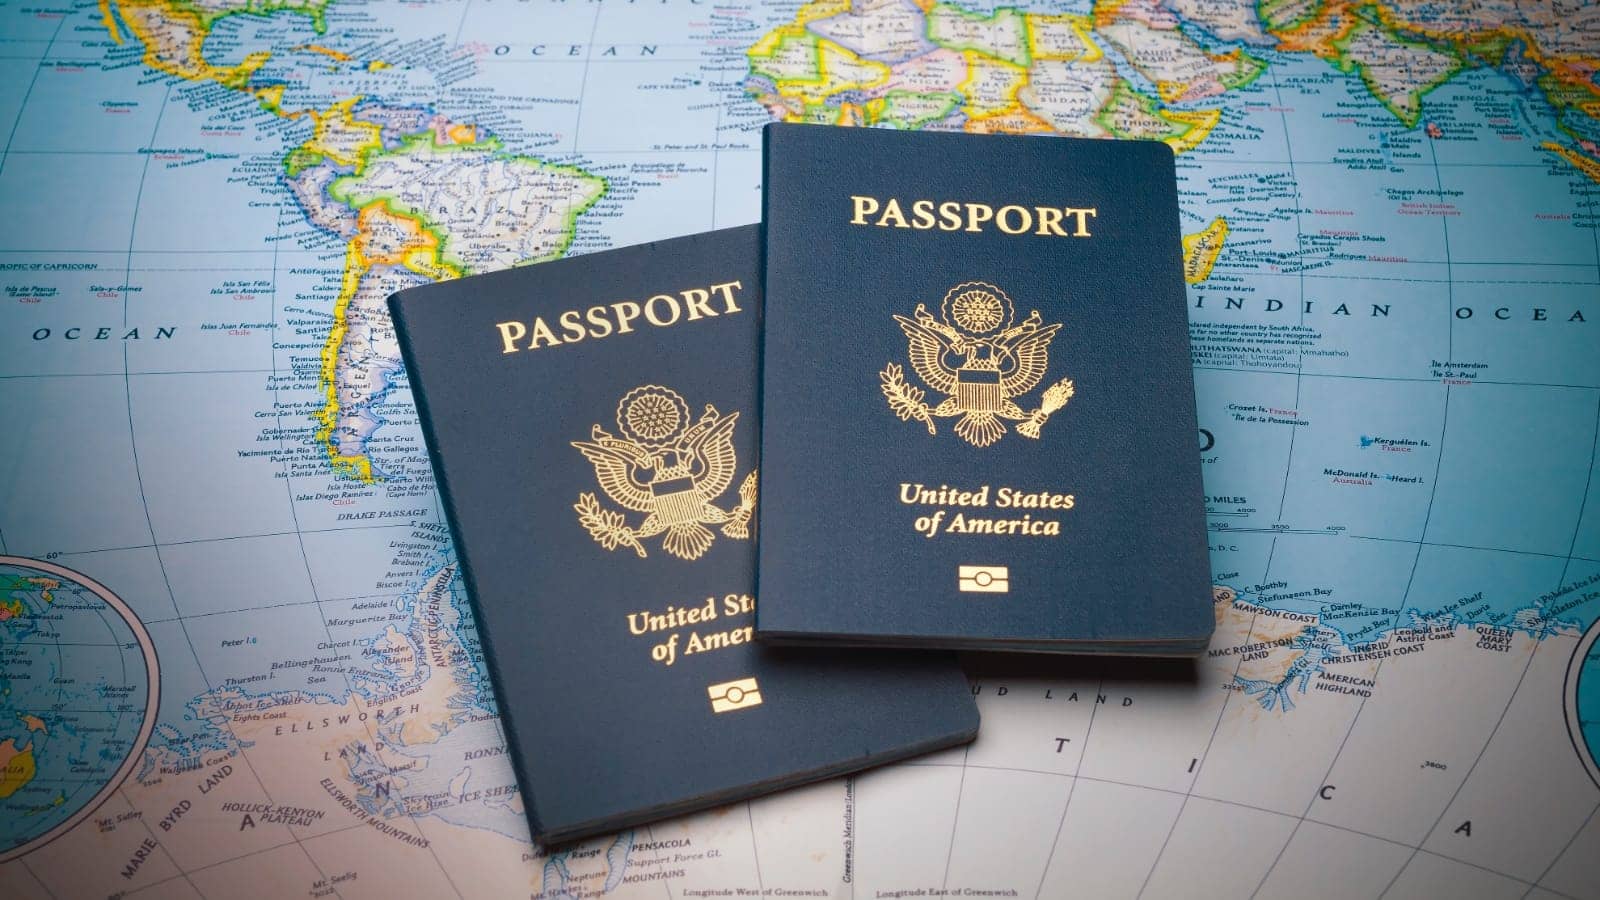 two passports sitting on a colored map of the world